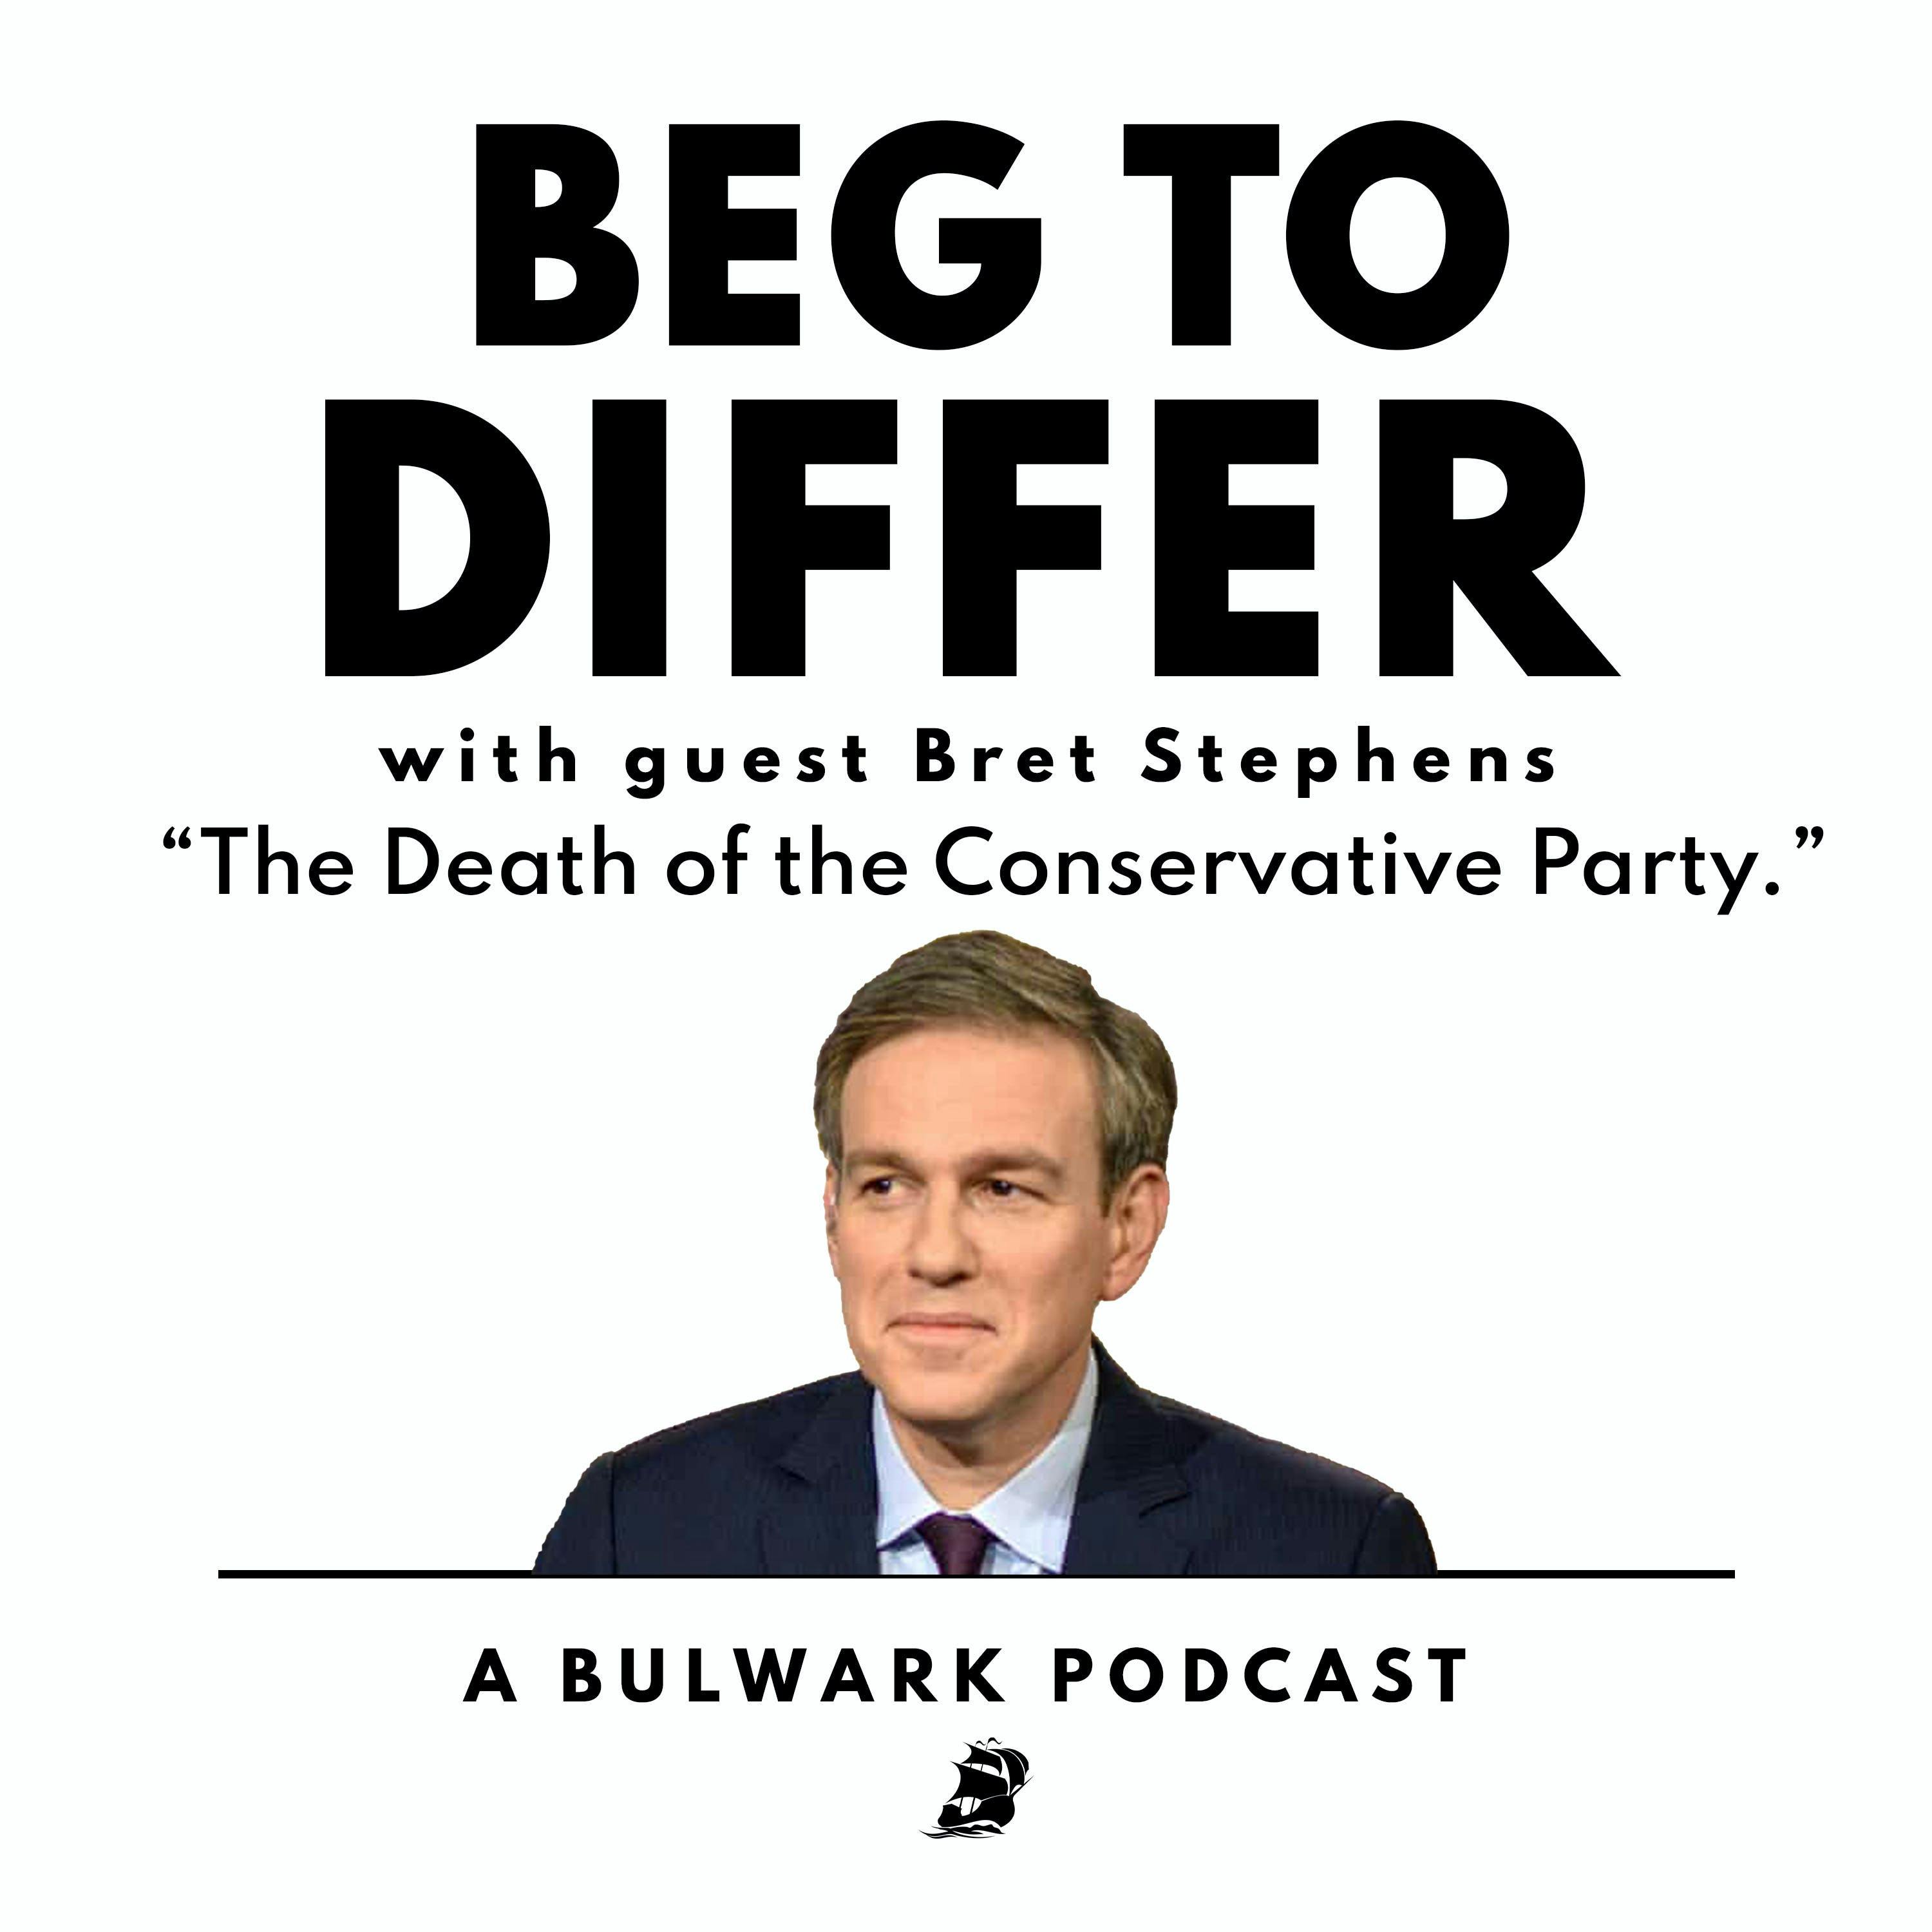 The Death of the Conservative Party